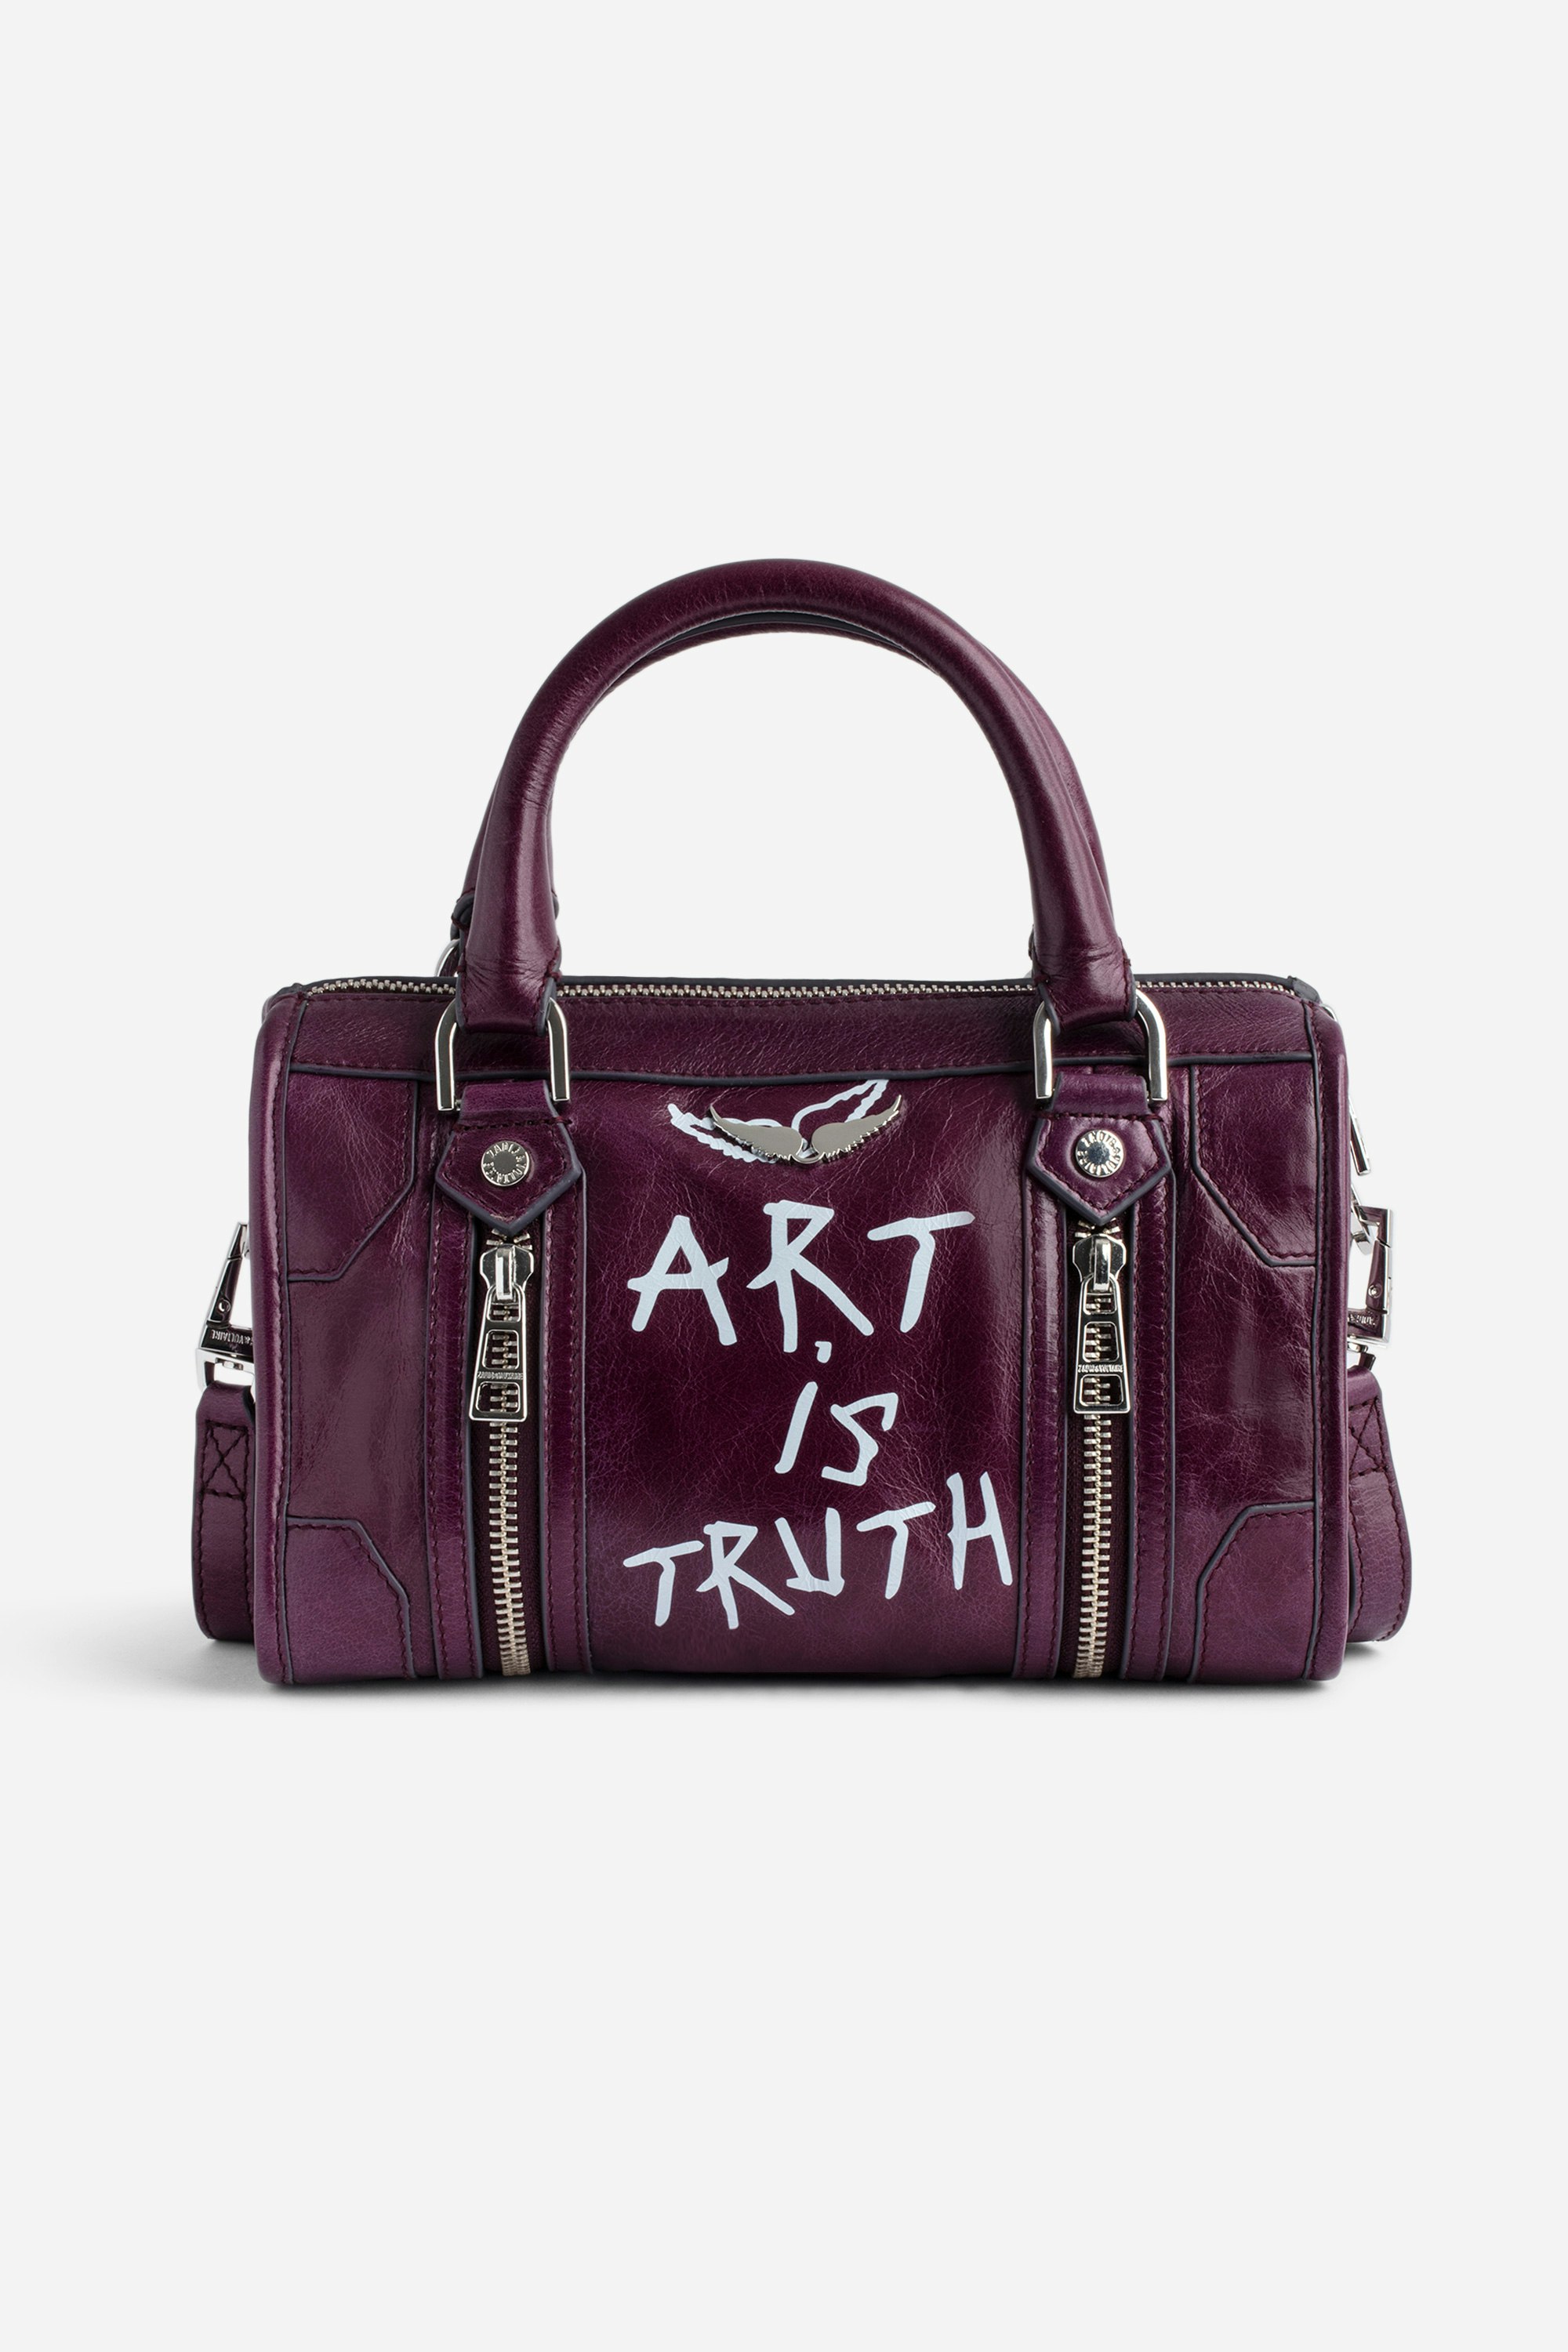 Sunny XS #2 Tag Bag - Women’s burgundy vintage-effect patent leather bag with handle and shoulder strap with wings and “Art is truth” tags.